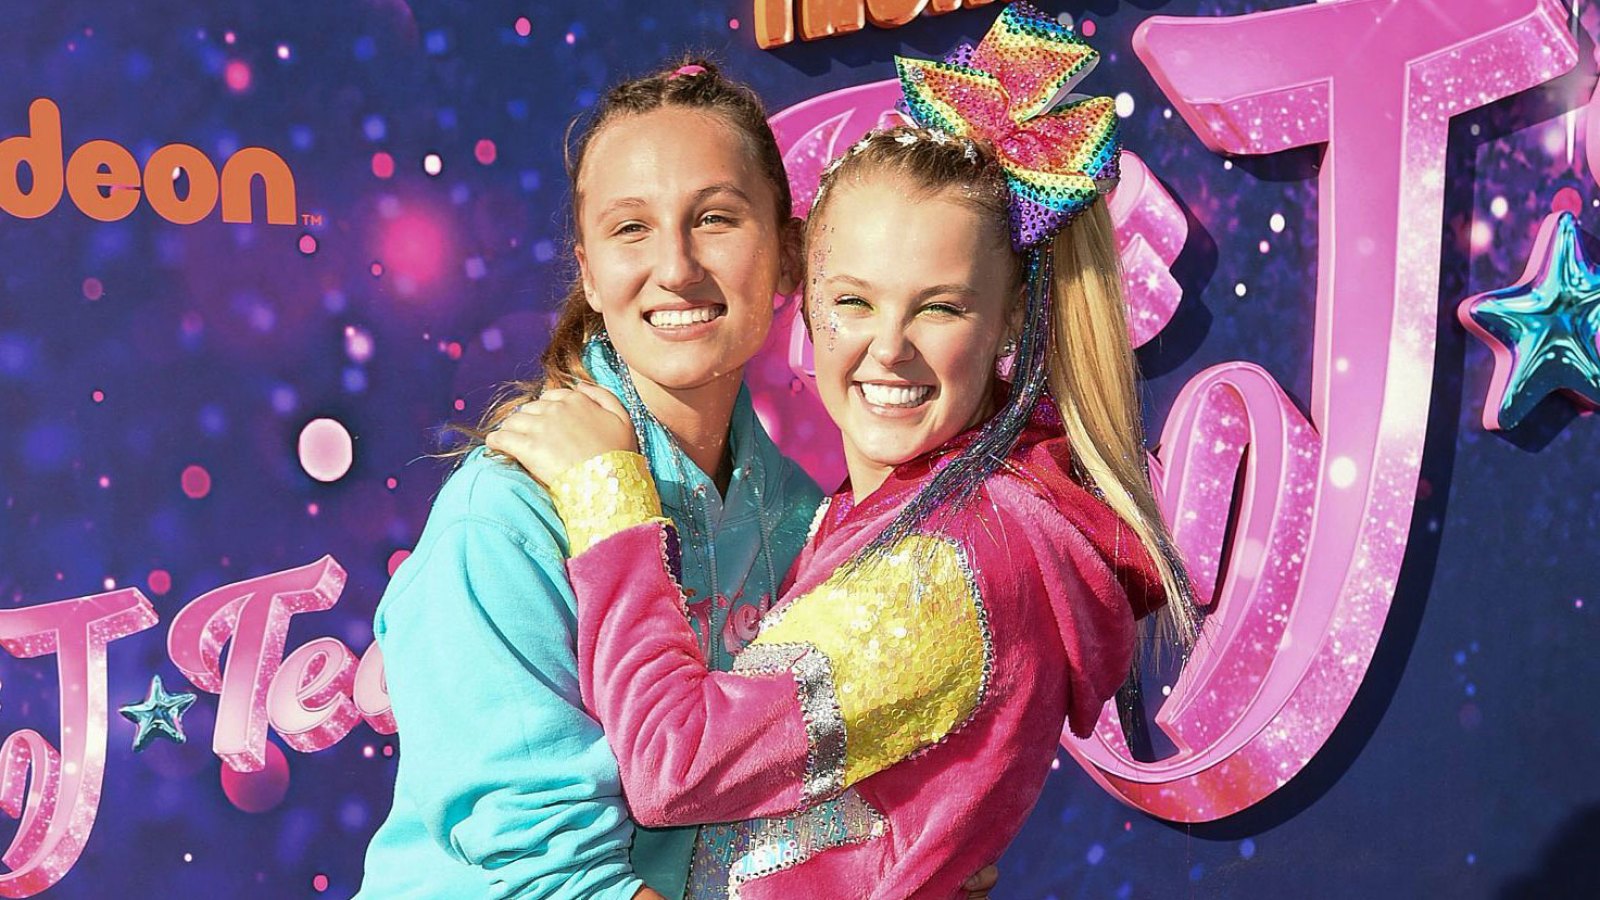 JoJo Siwa Confirms She and Girlfriend Kylie Prew Are Back Together 7 Months After Their Split